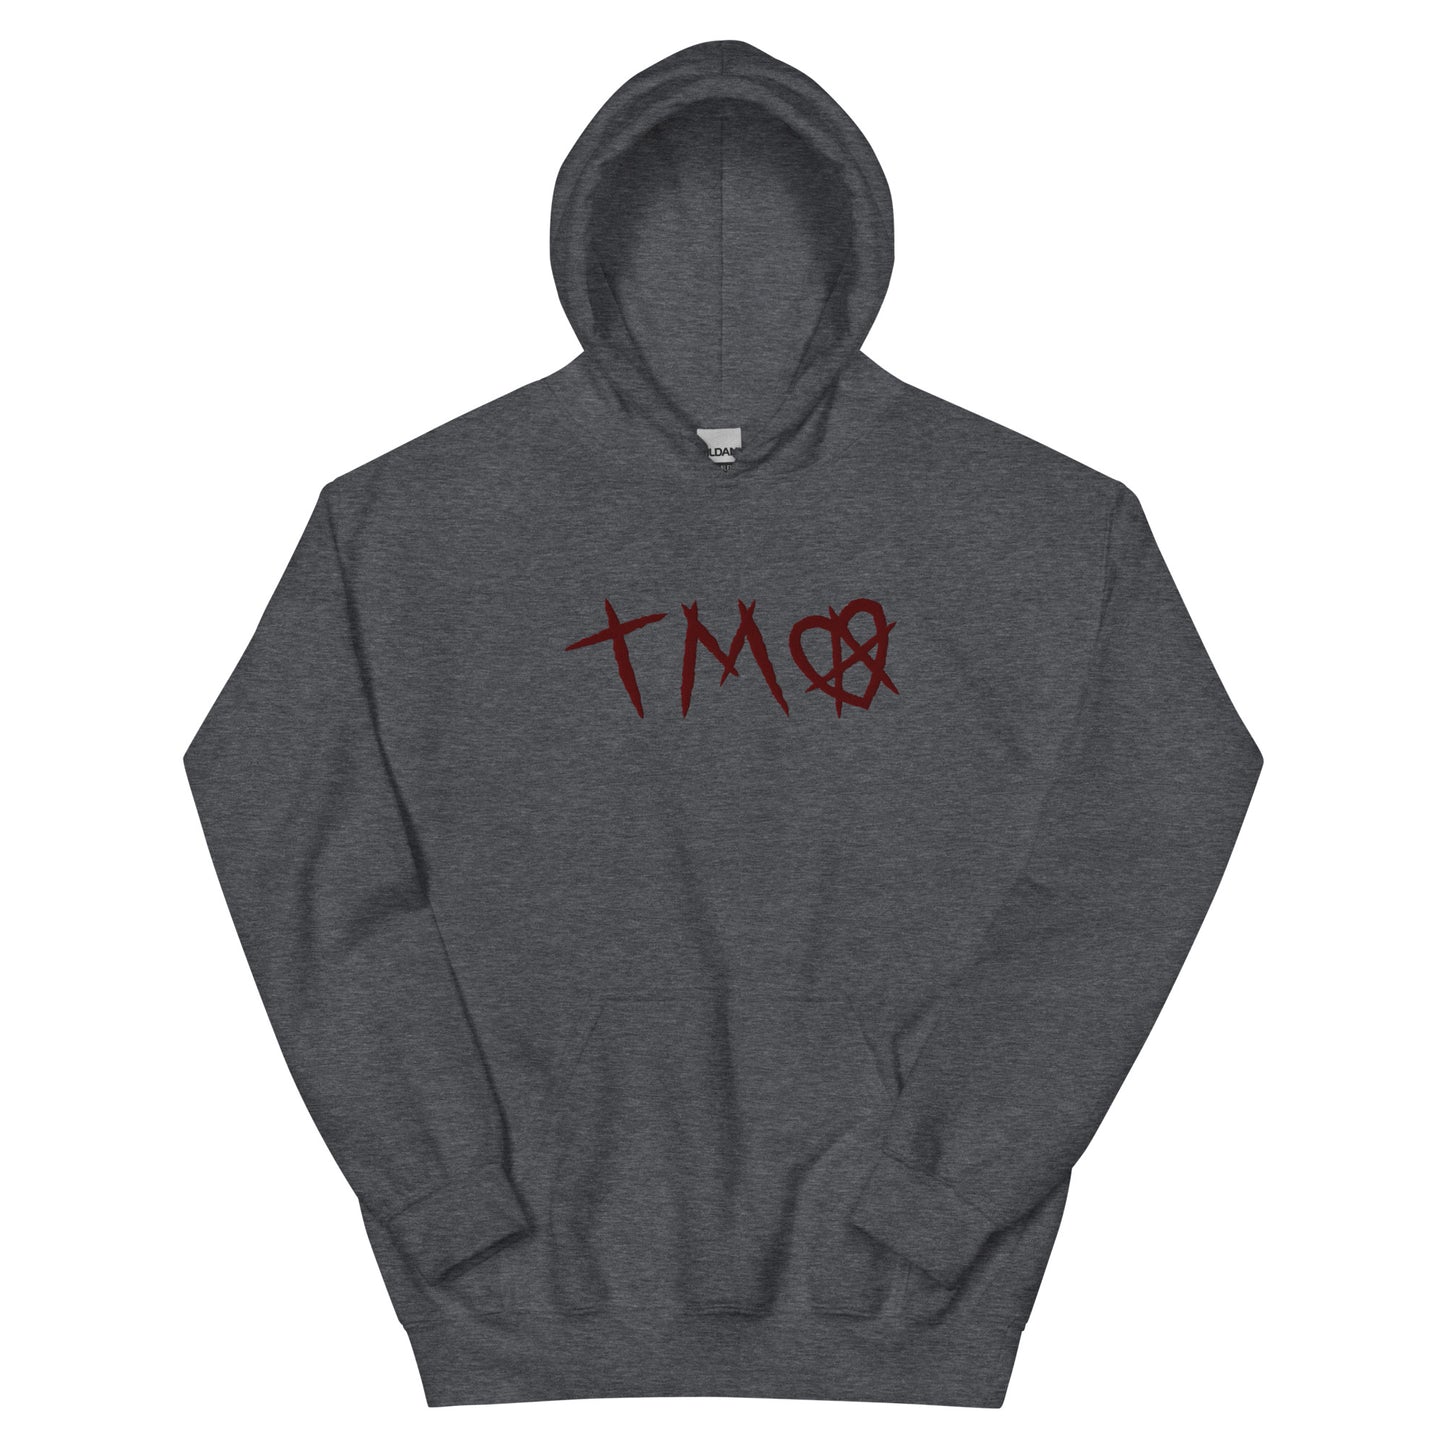 The Montauk Affect TMA Embroidered Unisex Hoodie